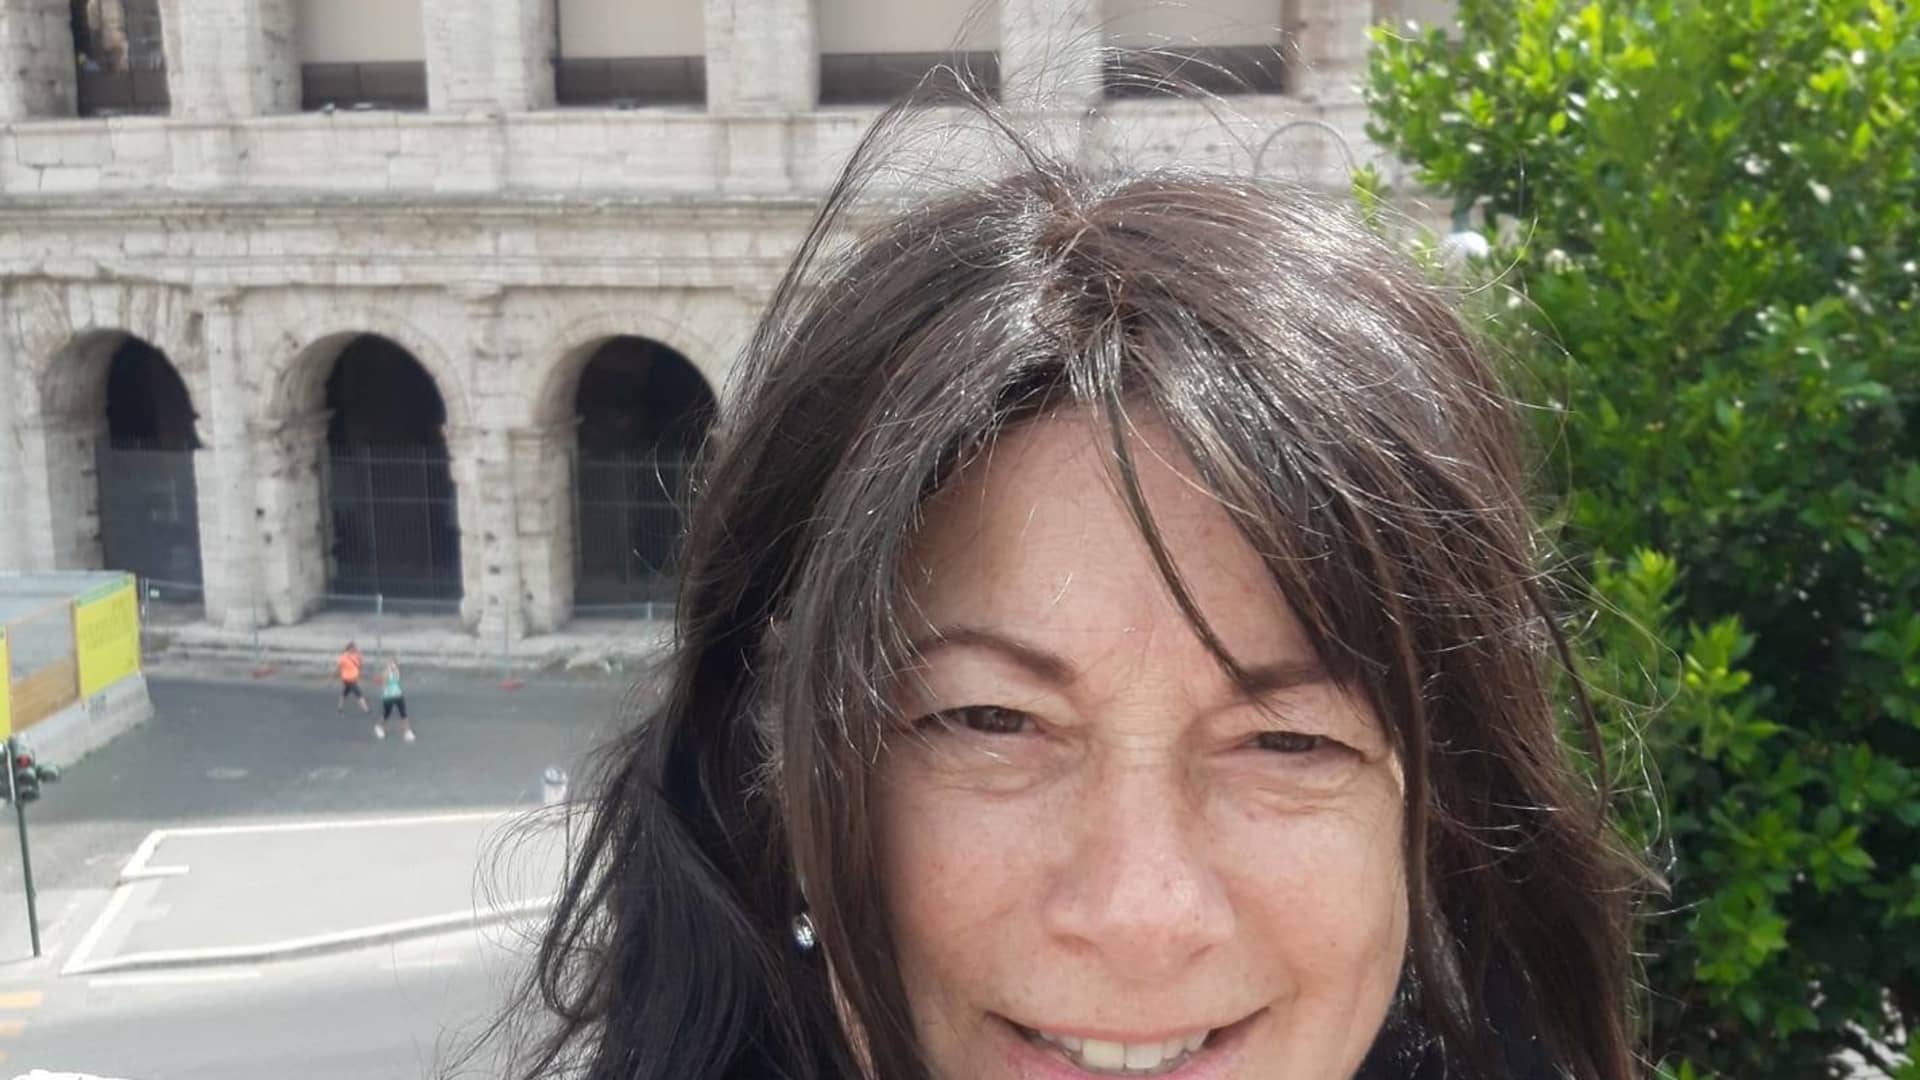 Carol Markino lives in Rome and works as an English teacher.